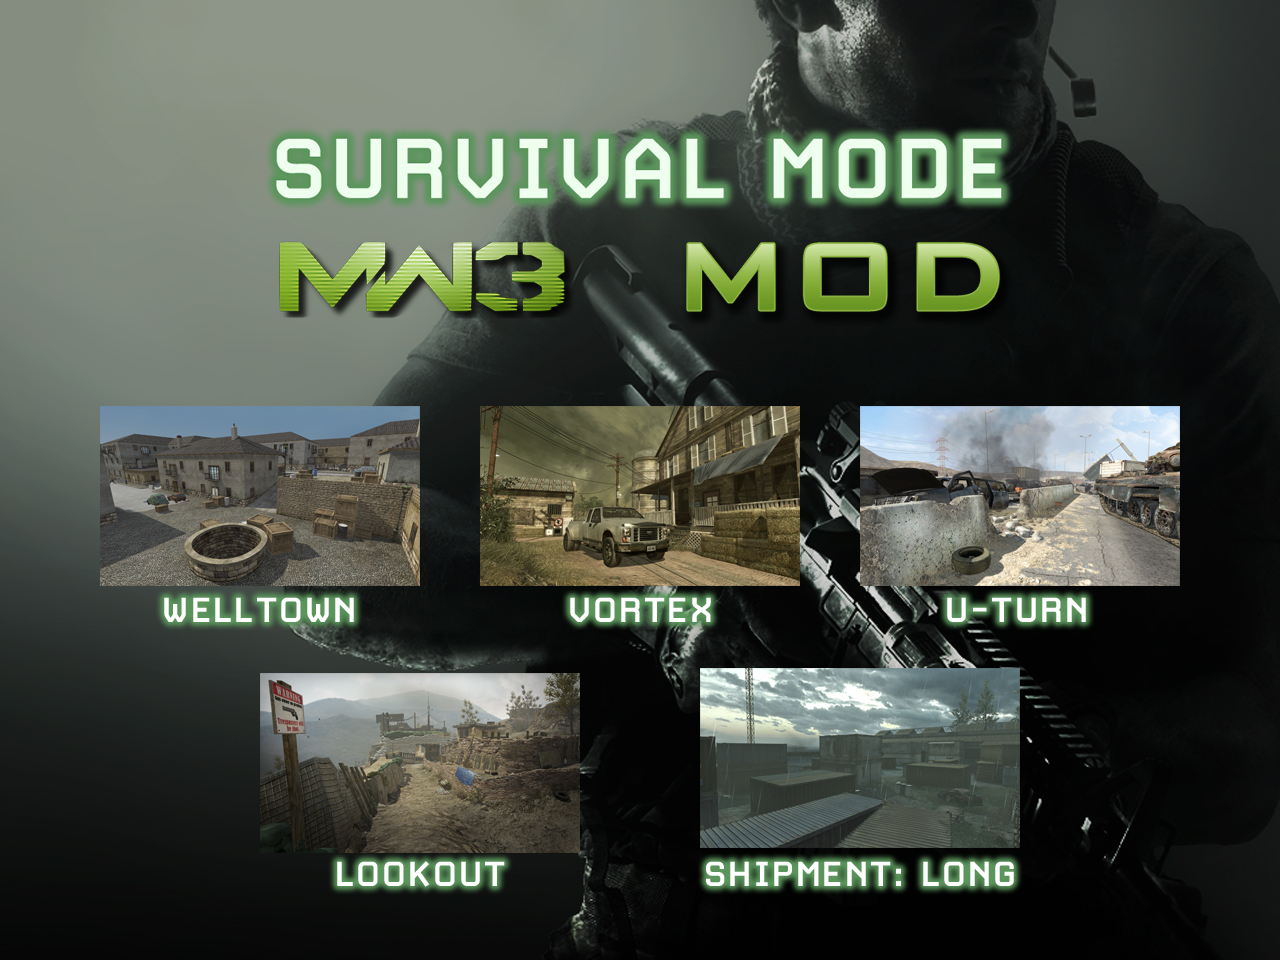 GitHub - cragson/mw3-surviv0r: An external cheat for the survival mode in  Call of Duty Modern Warfare 3 (steam), written in C++.